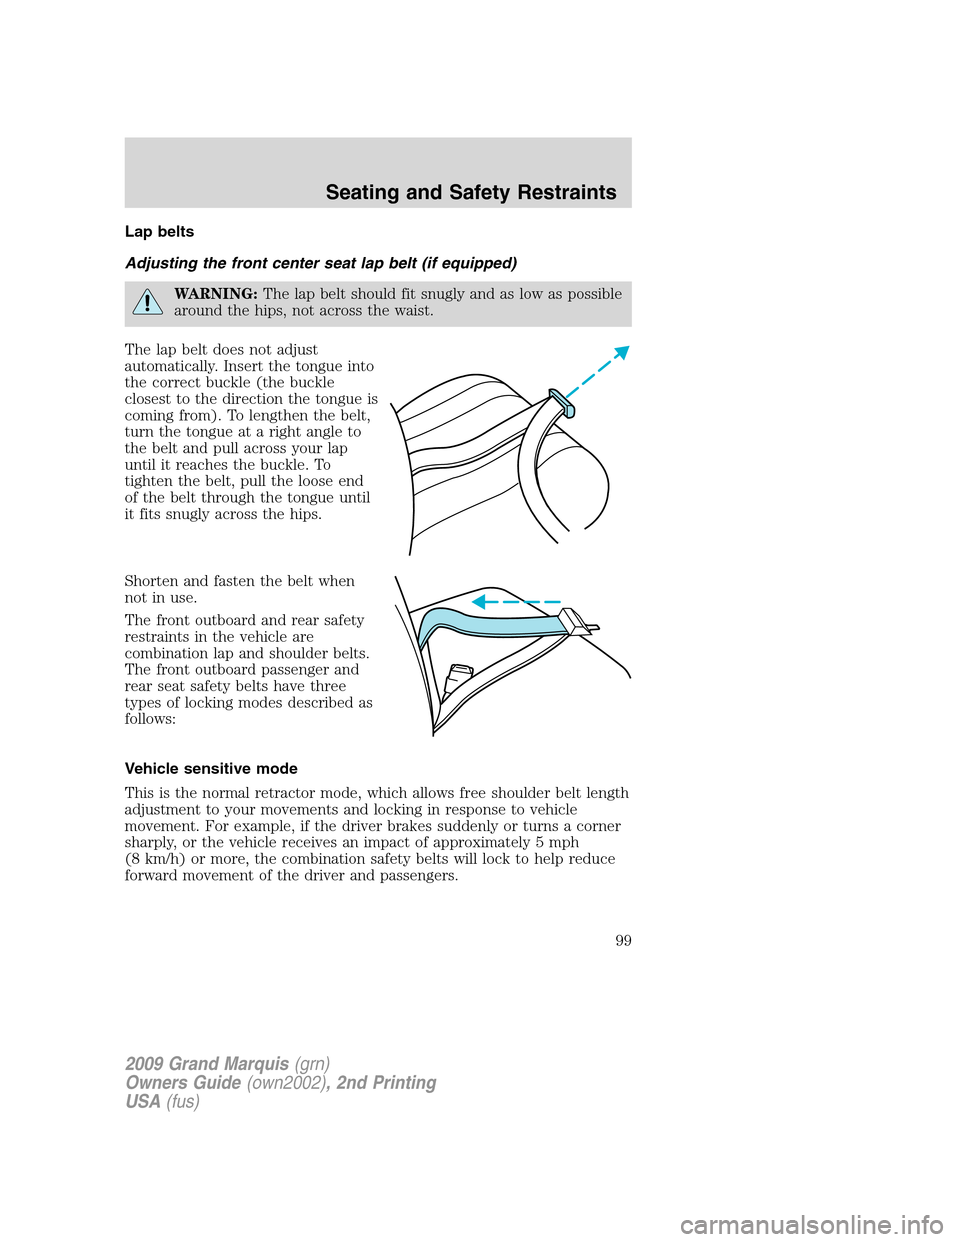 Mercury Grand Marquis 2009  s Service Manual Lap belts
Adjusting the front center seat lap belt (if equipped)
WARNING:The lap belt should fit snugly and as low as possible
around the hips, not across the waist.
The lap belt does not adjust
autom